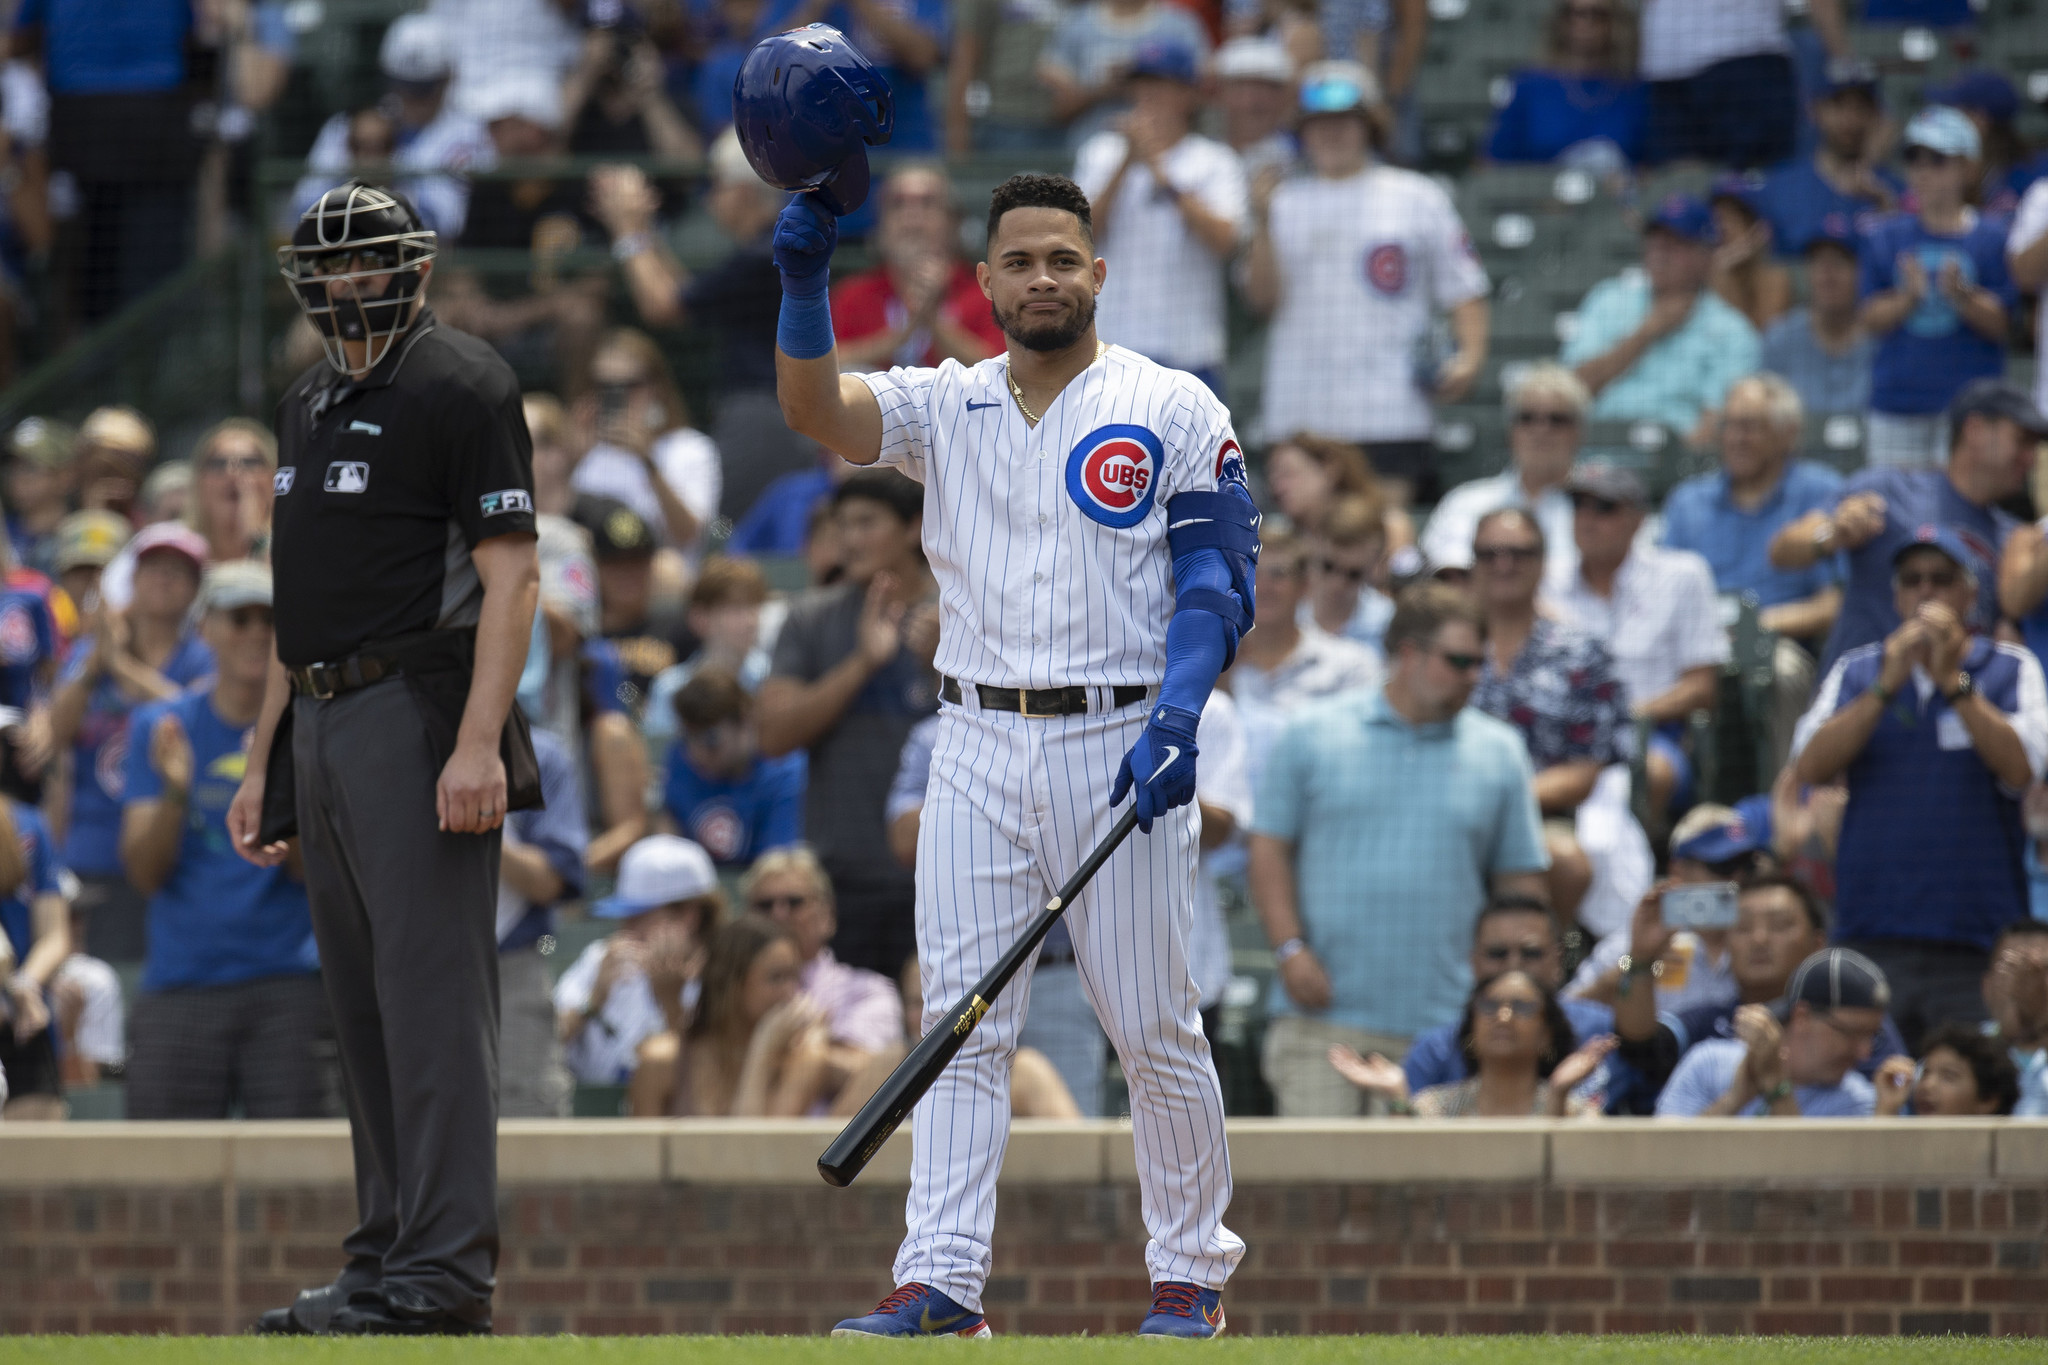 Theriot, Byrd Both TOOTBLAN; Cubs Winning Streak Ends At 3